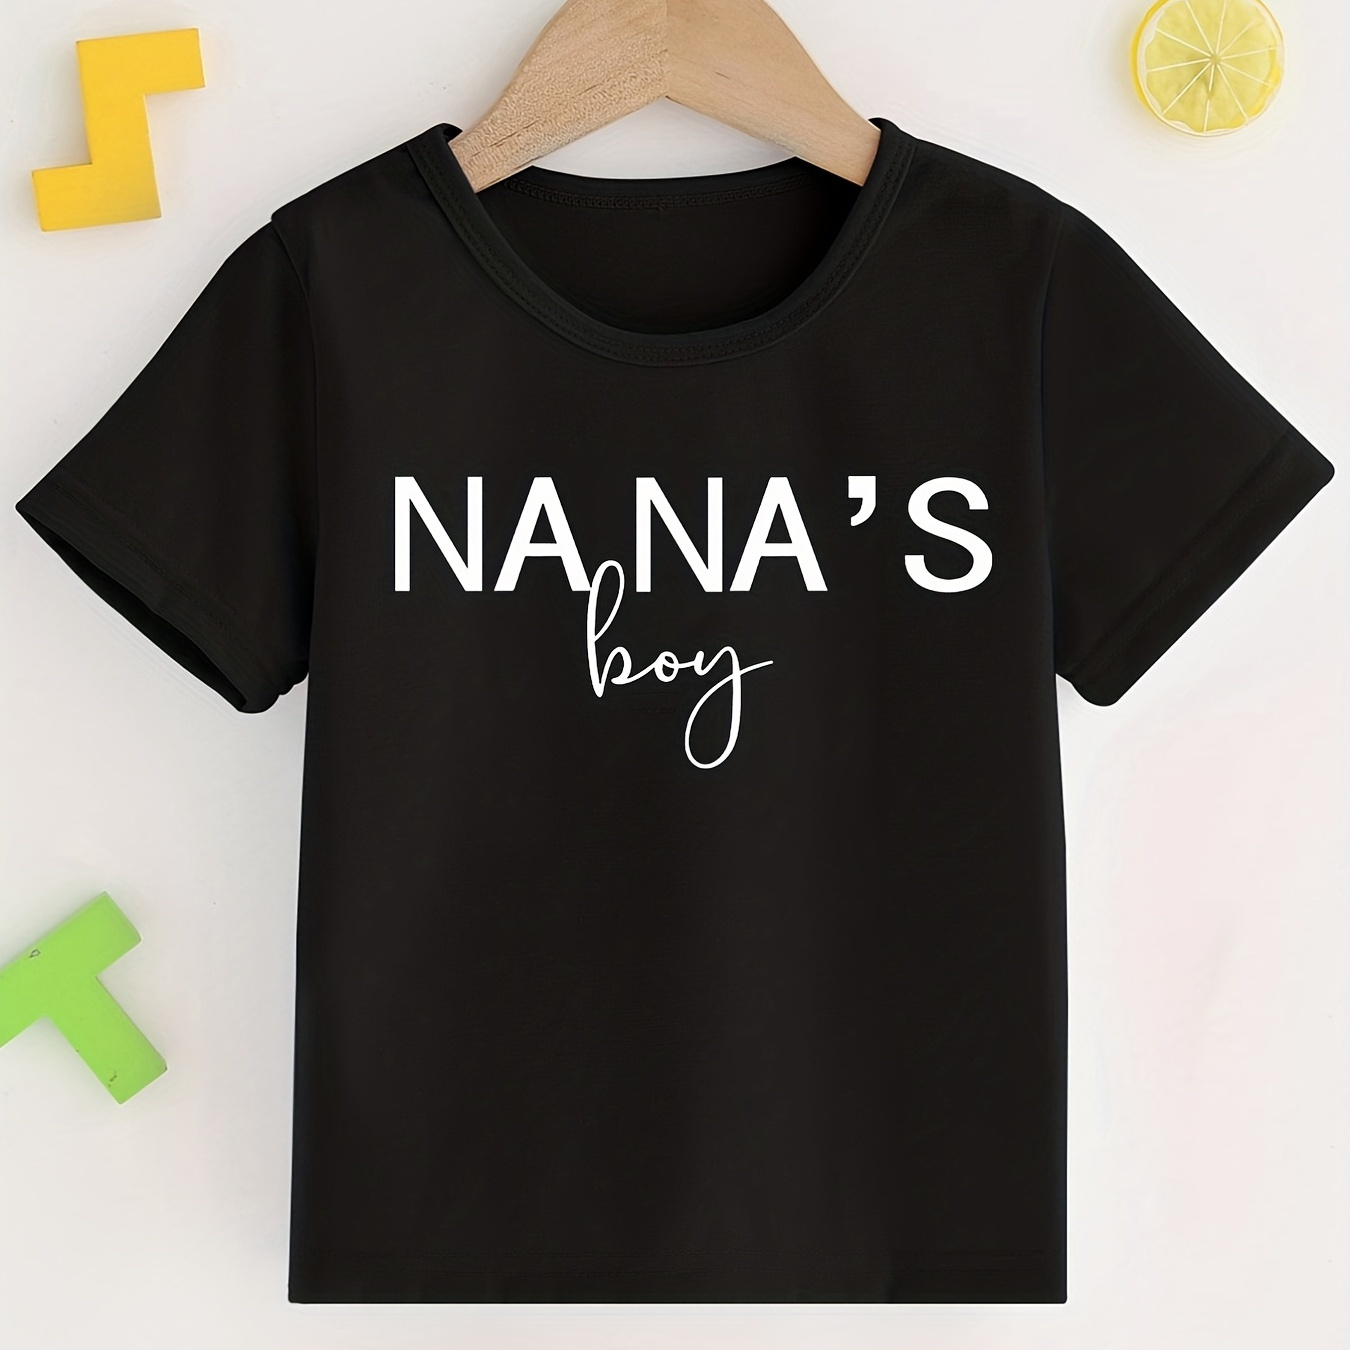 

nana 's Boy" T-shirt, Round Neck Tees Tops Casual Soft Comfortable, Boys And Girls Summer Clothes